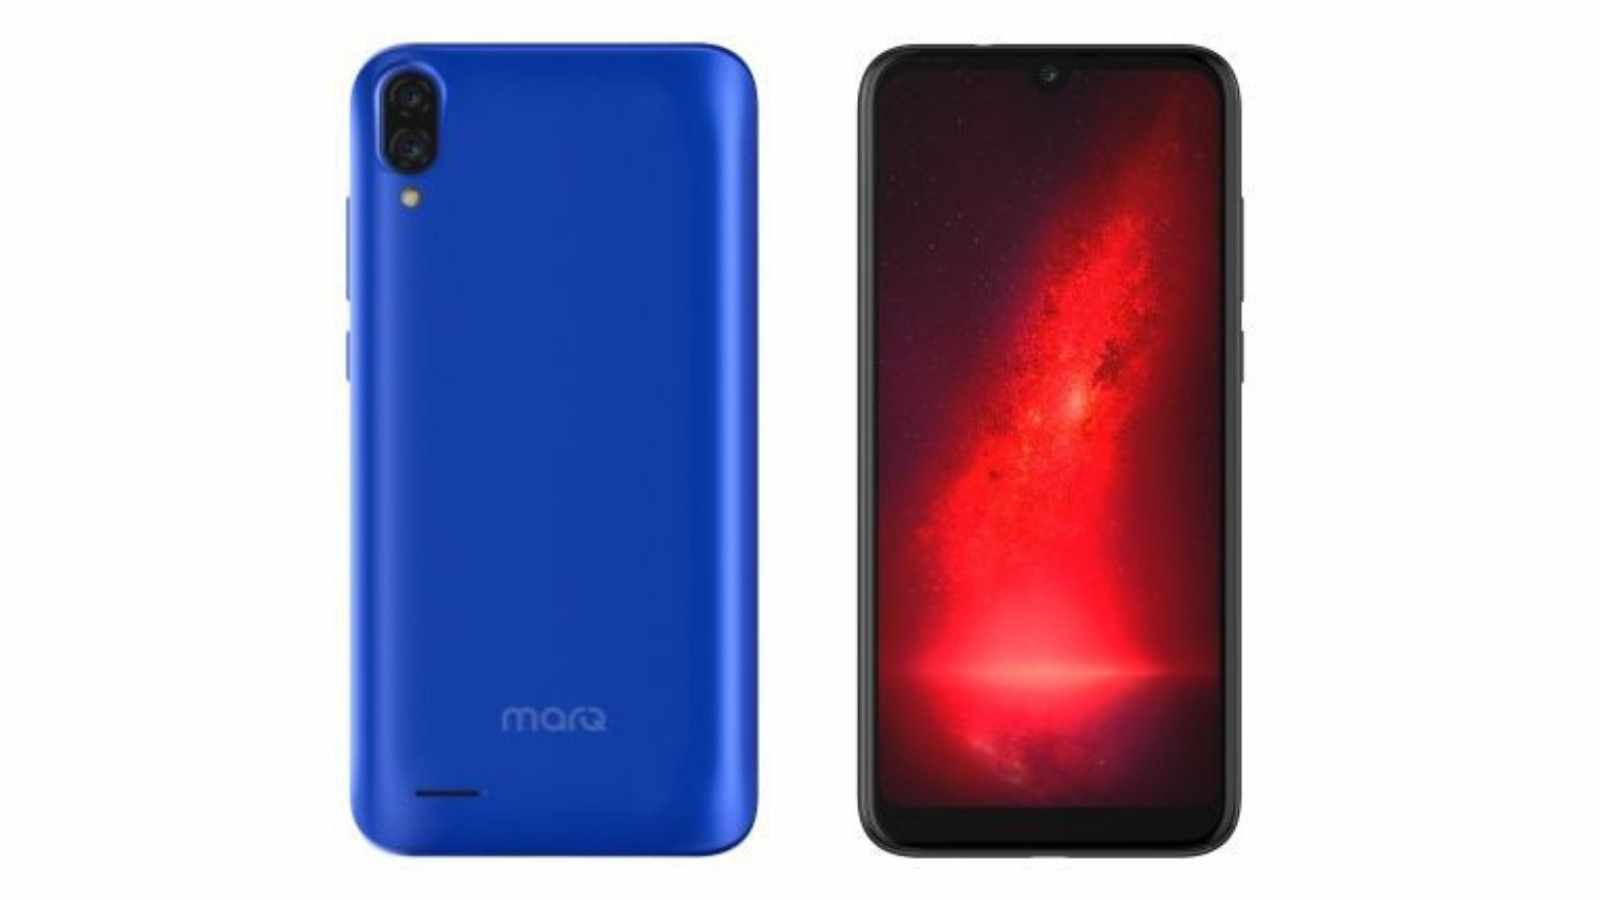 MarQ M3 Smart with dual rear camera, waterdrop notch launched in India: Price, Specifications